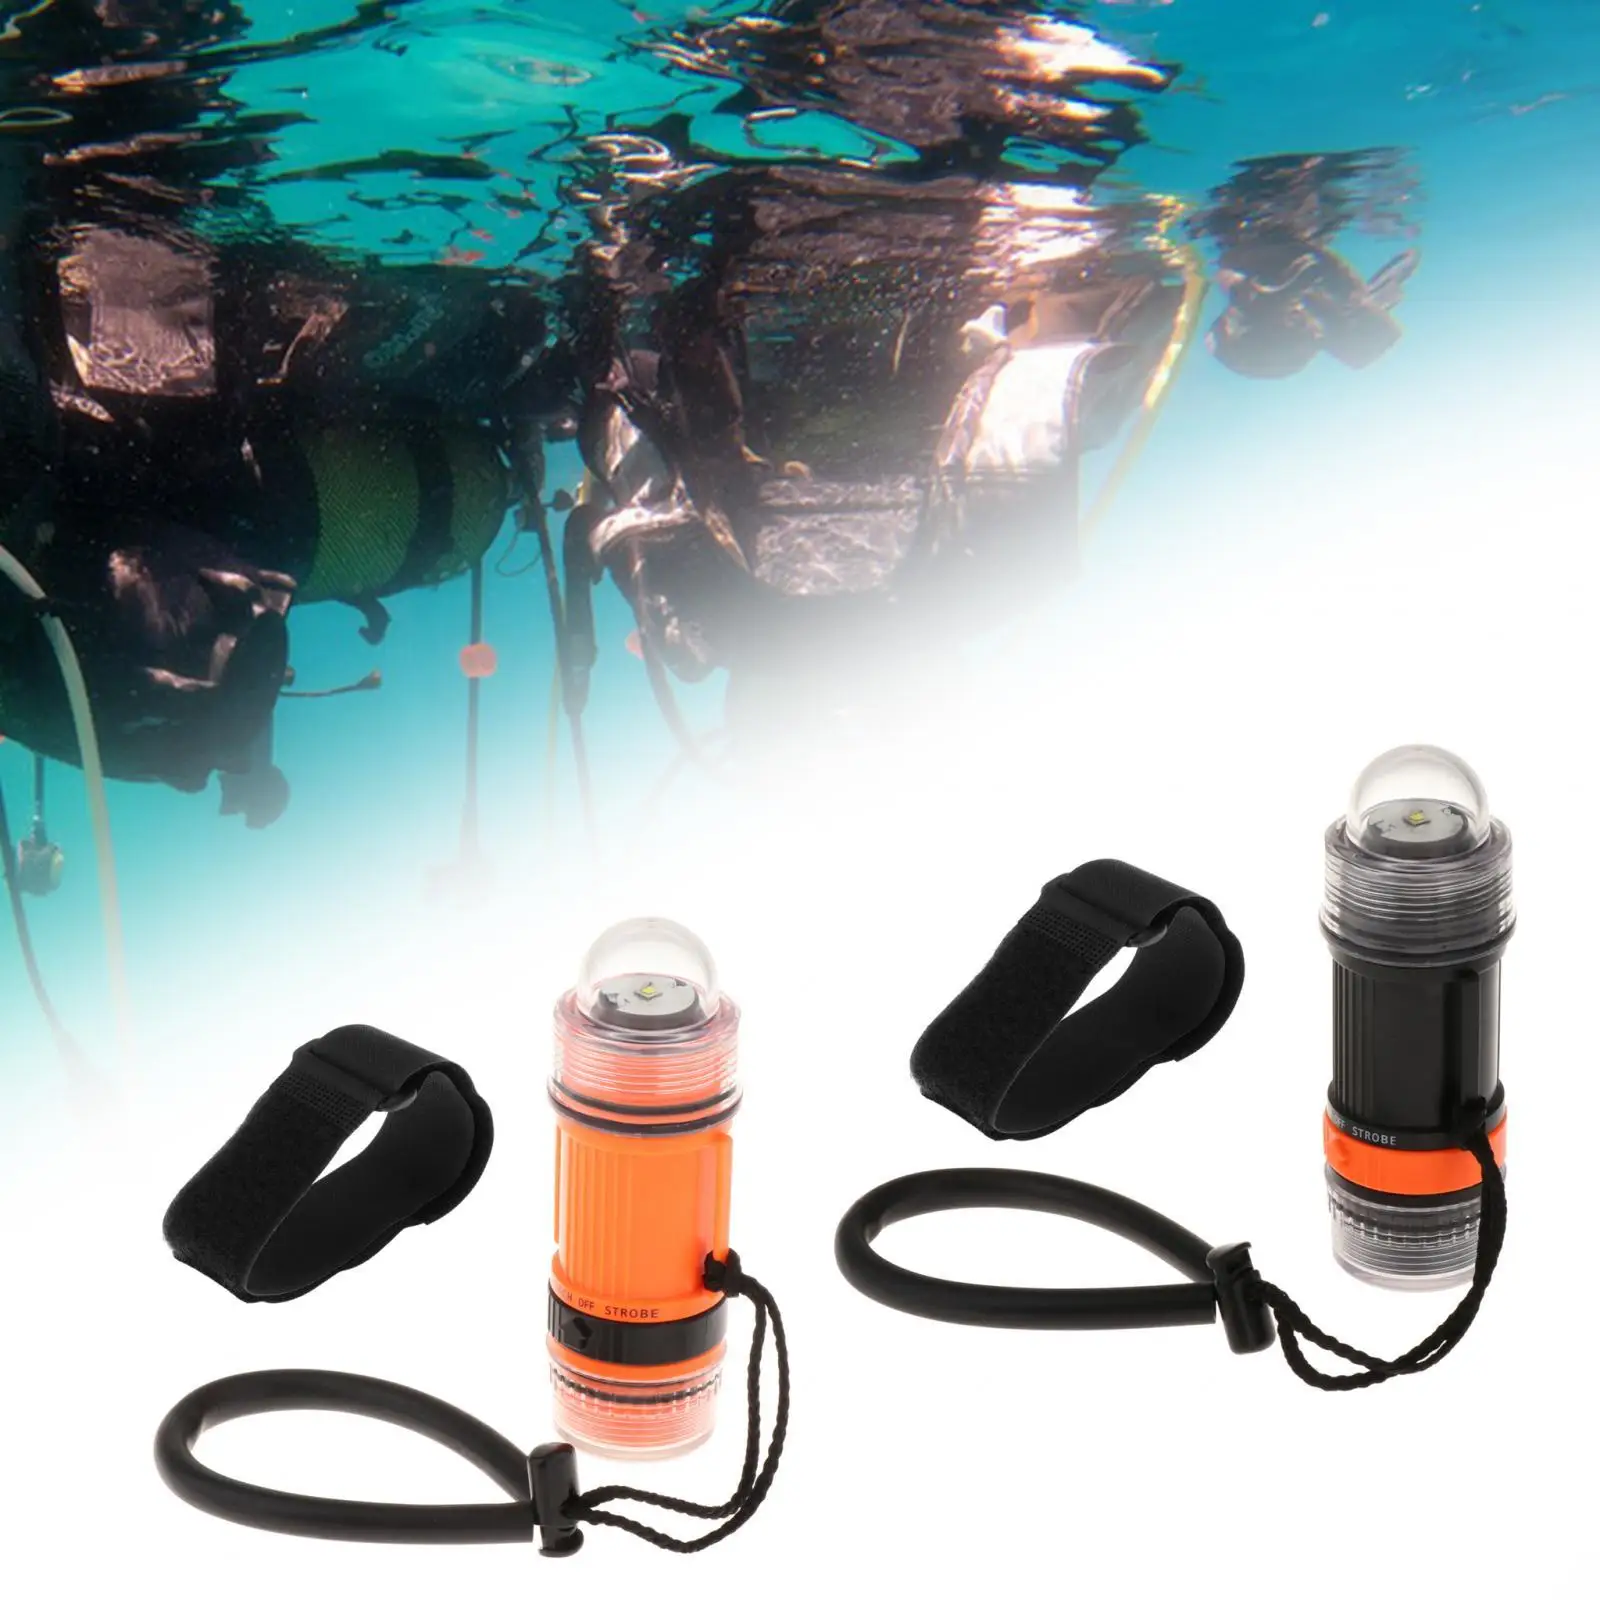 Diving Flashlight Bright Handheld Snorkeling 2 in 1 Portable Scuba Diving Strobe for Hiking Under Water Outdoor Deep Sea Caving